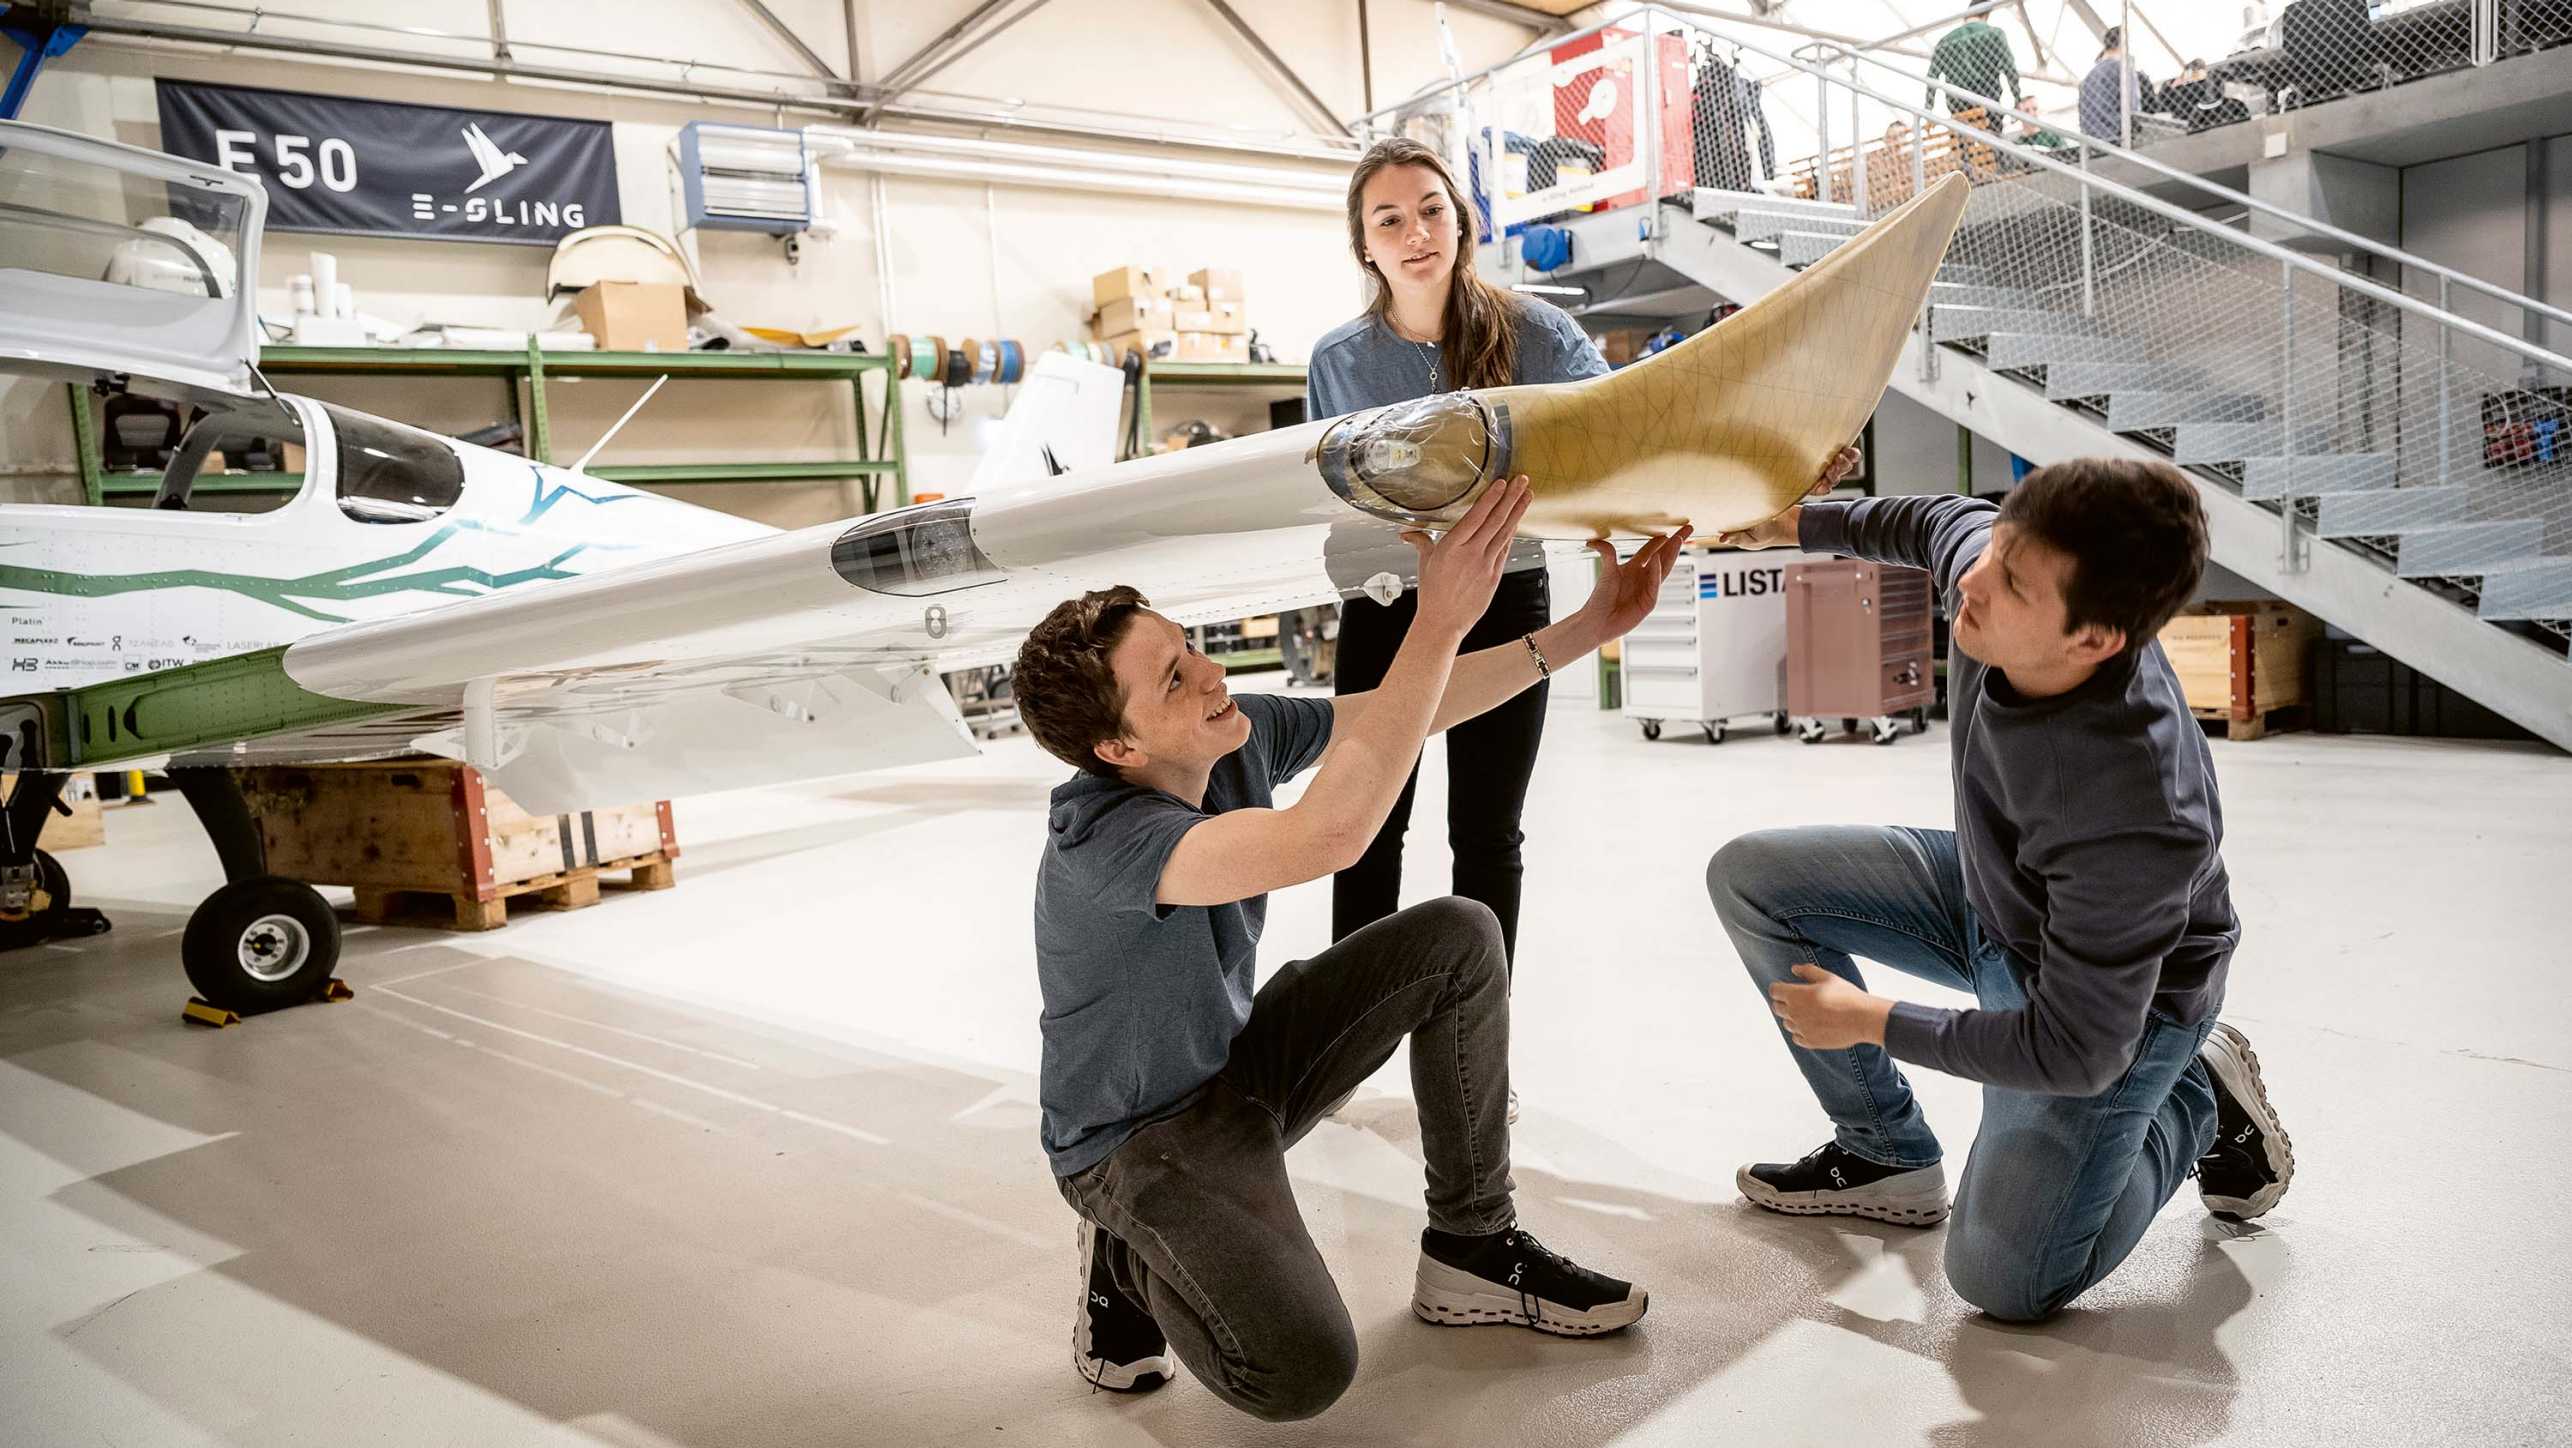 Jan, Elsa and Joël examine the wing tip